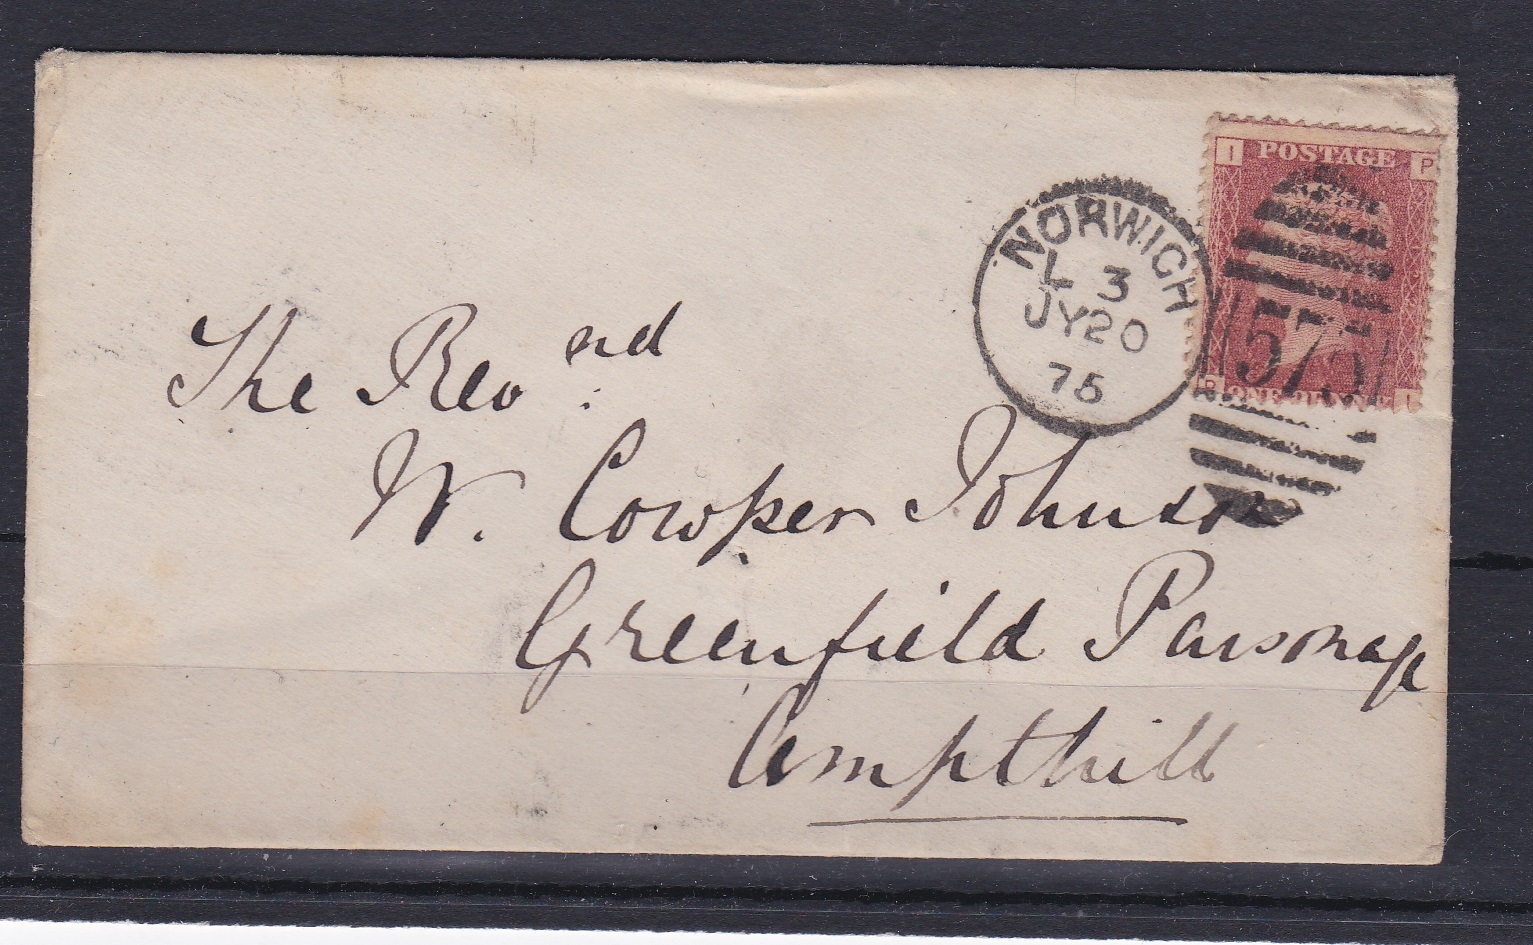 Great Britain 1875-Envelope posted to Ampthill cancelled 20.7.1875 Norwich with single ring cancel